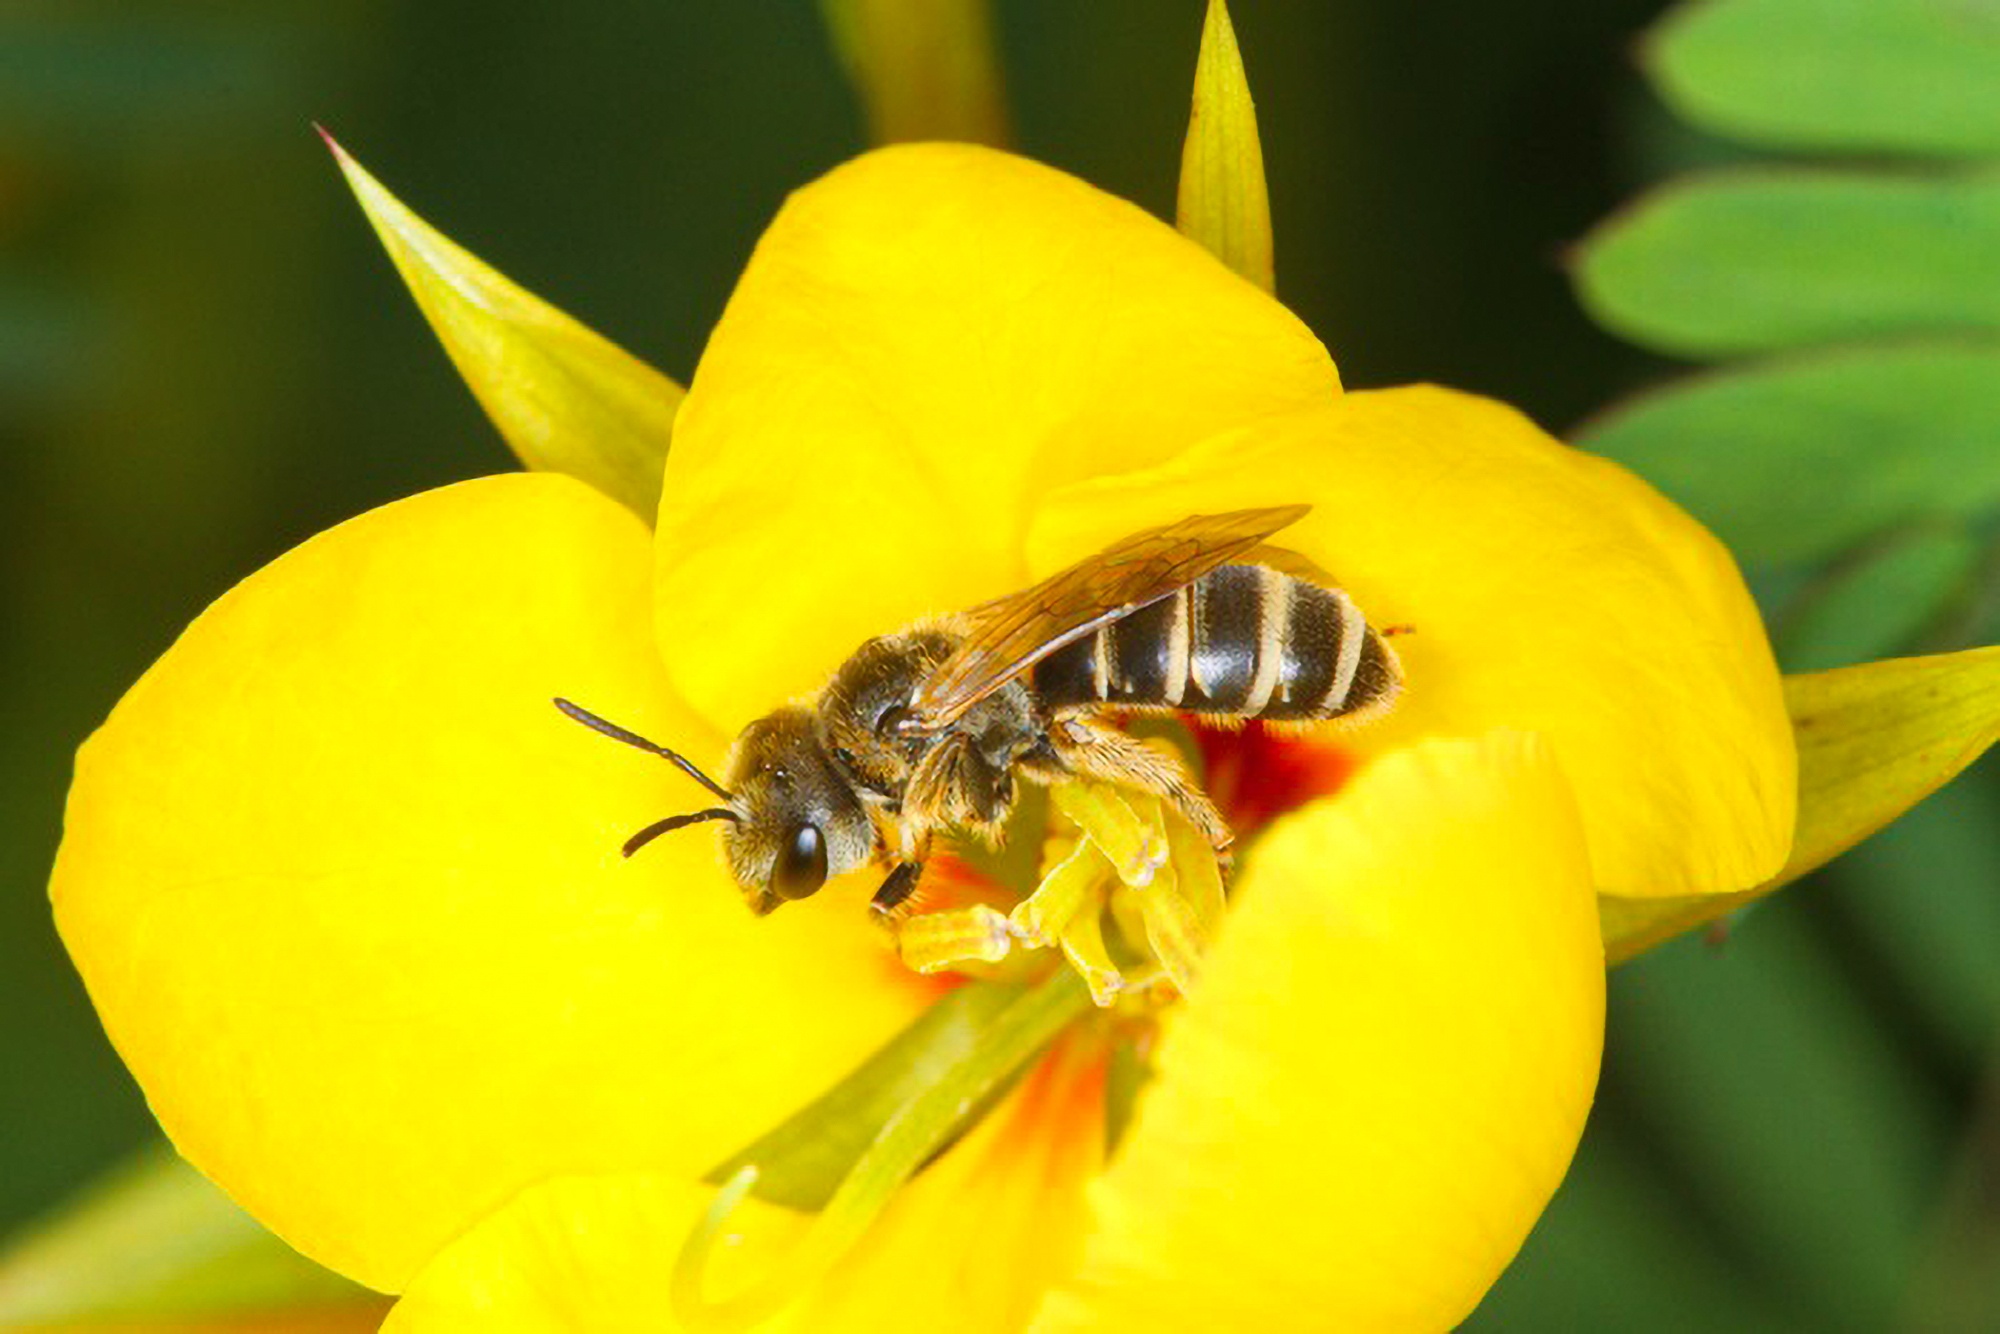 Read more about the article LIFE ON EARTH: Bee Diversity Vital For Healthy Ecosystems On Planet